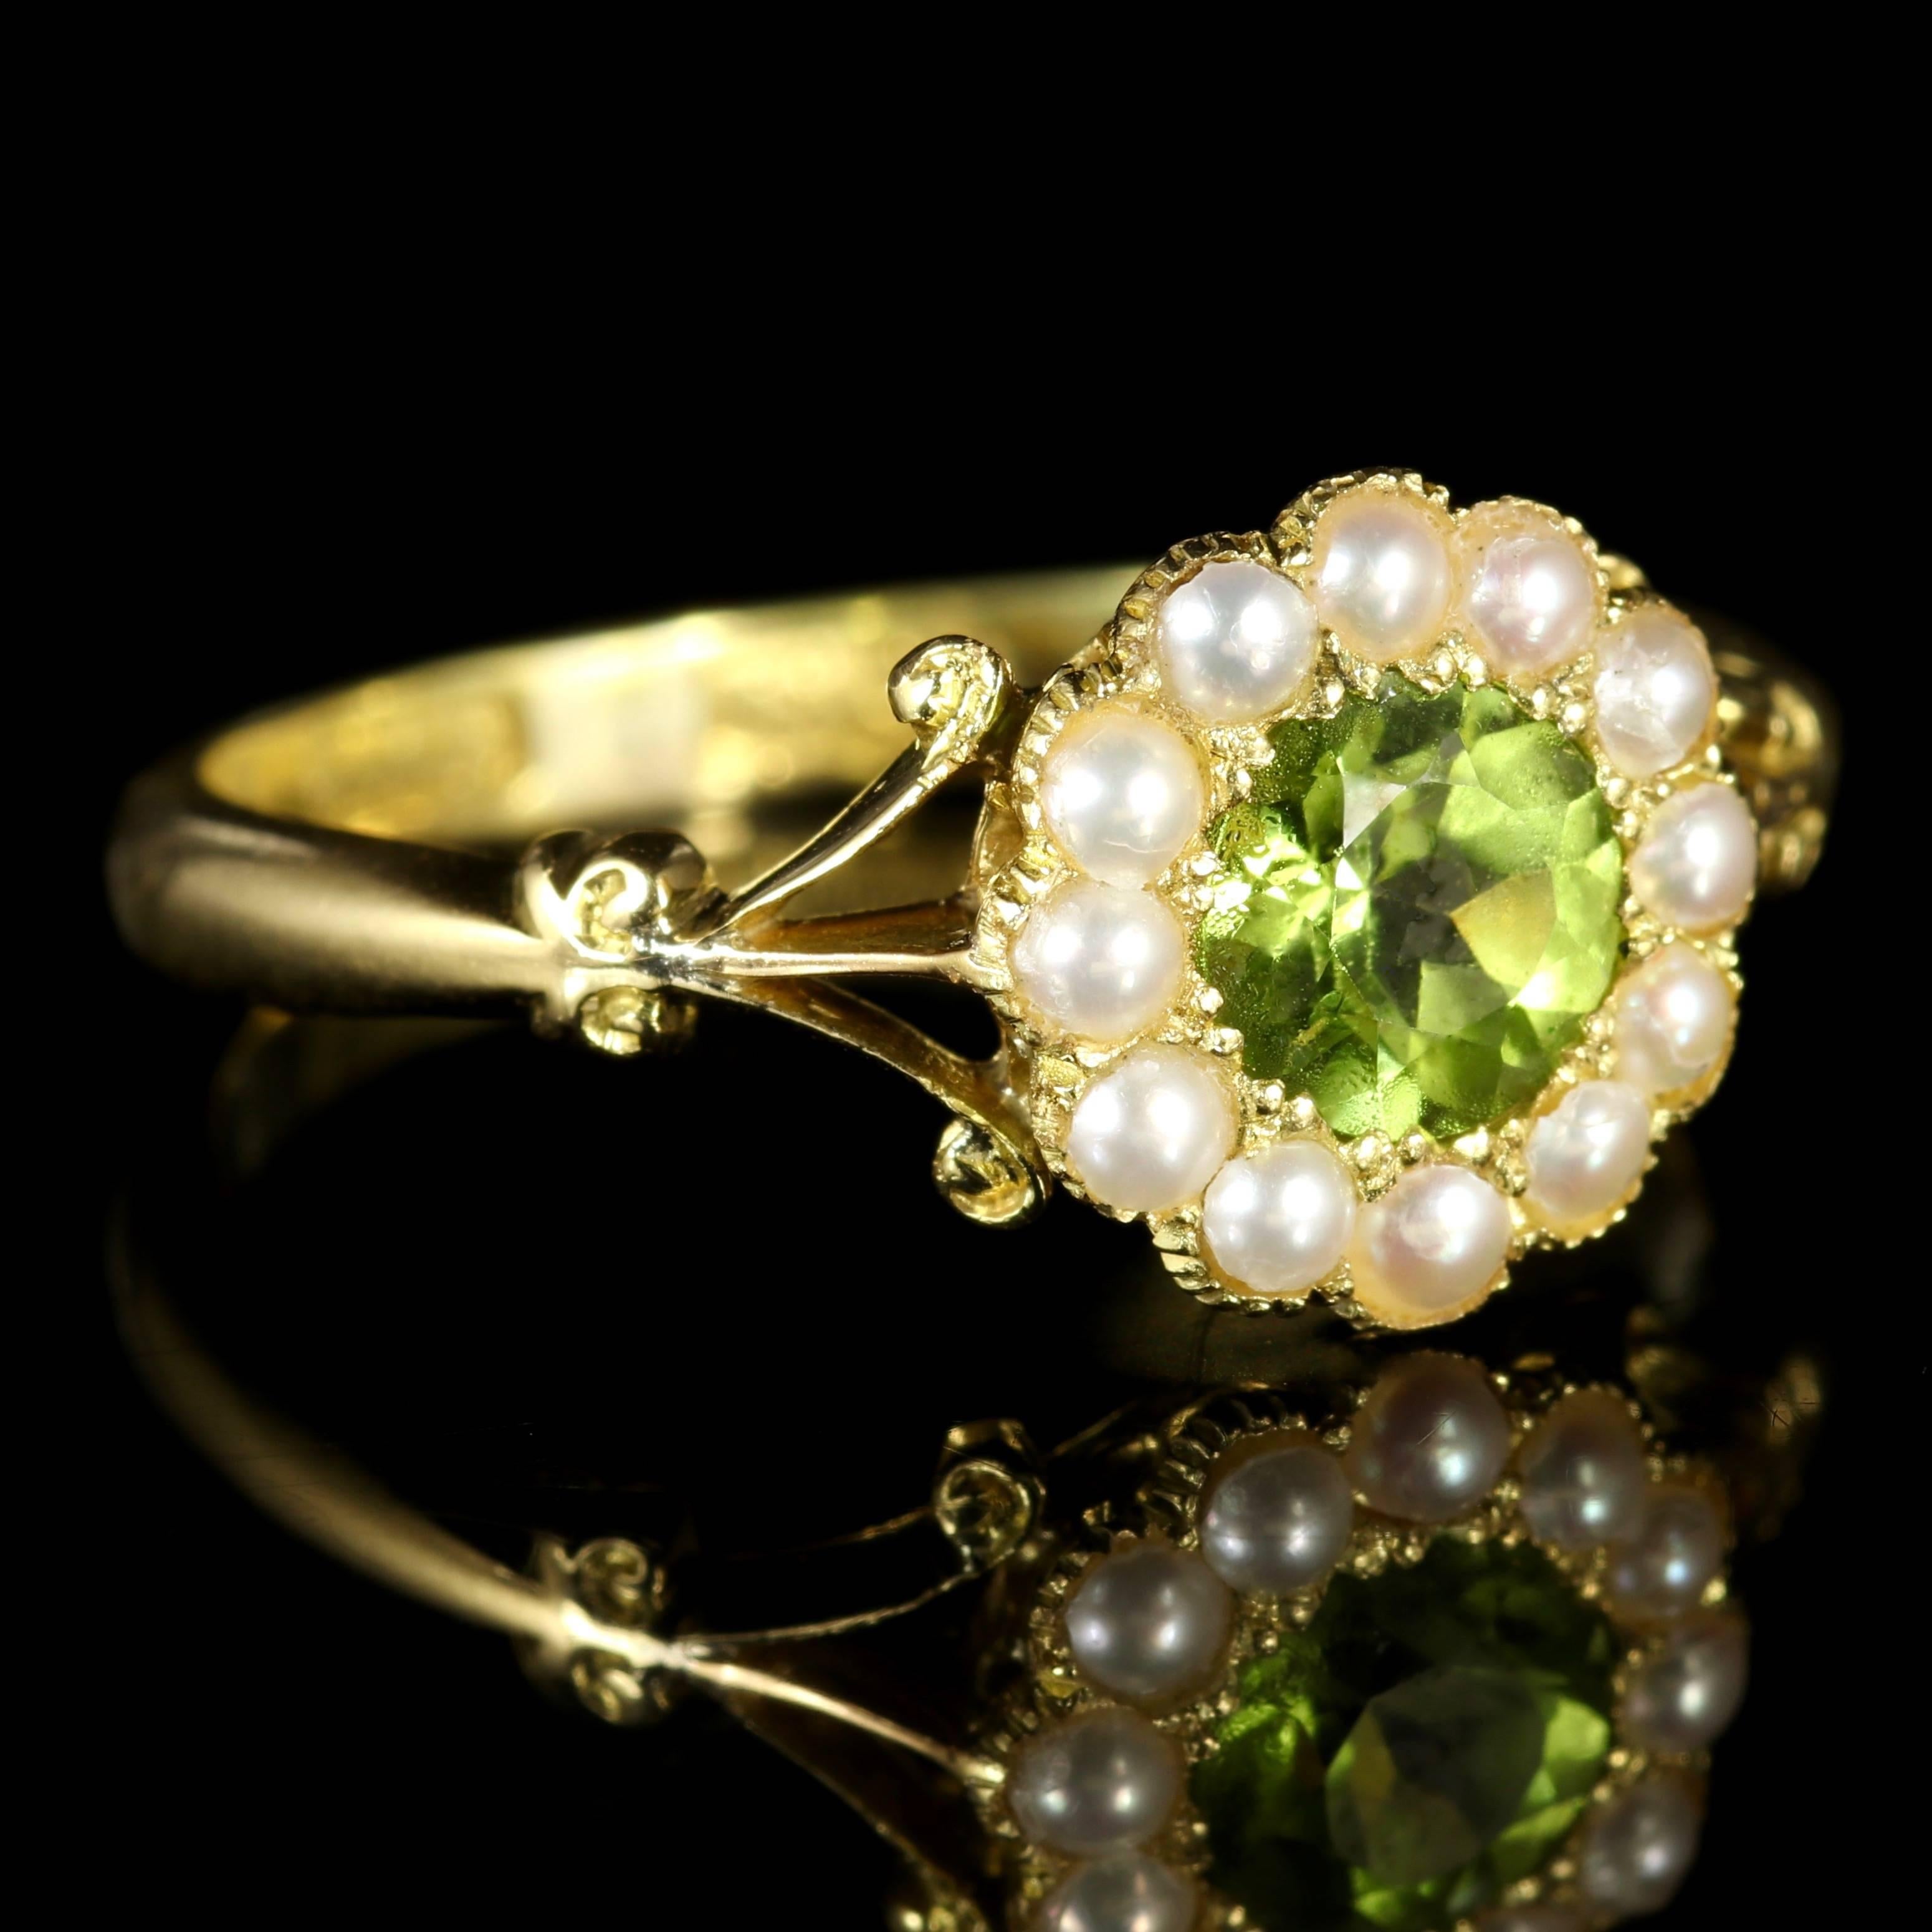 To read more please click continue reading below...

This genuine Victorian 18ct Yellow Gold ring is adorned with a rich olive green Peridot and lustrous Pearls.

The Peridot is a stone of lightness and beauty and was believed to be a stone of